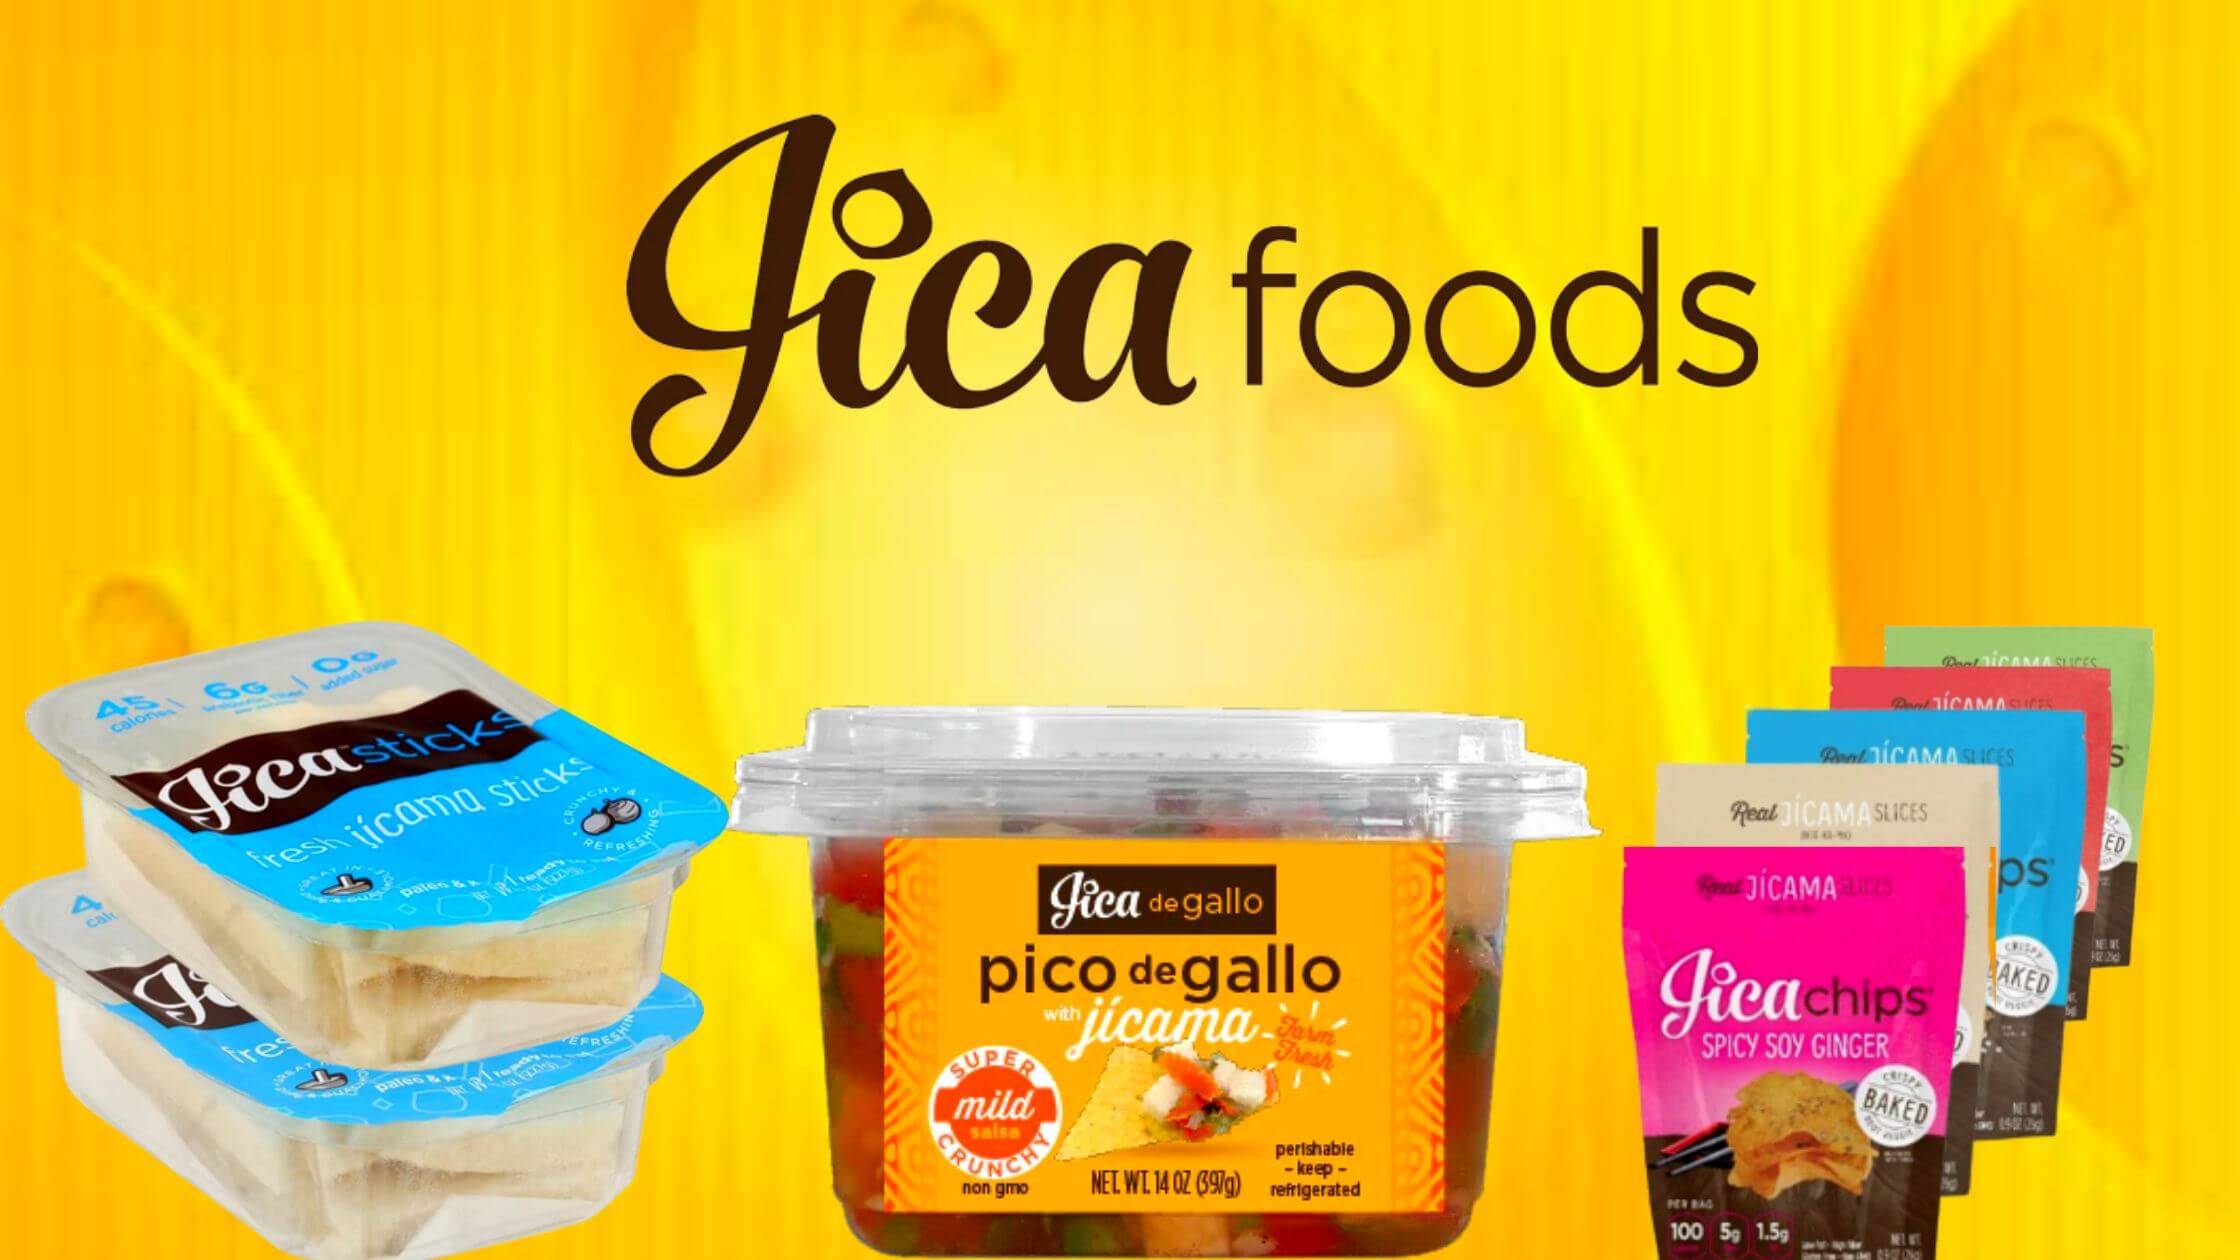 Jica Foods On Shark Tank Price, Founders, Purchase Options, And Additional Information